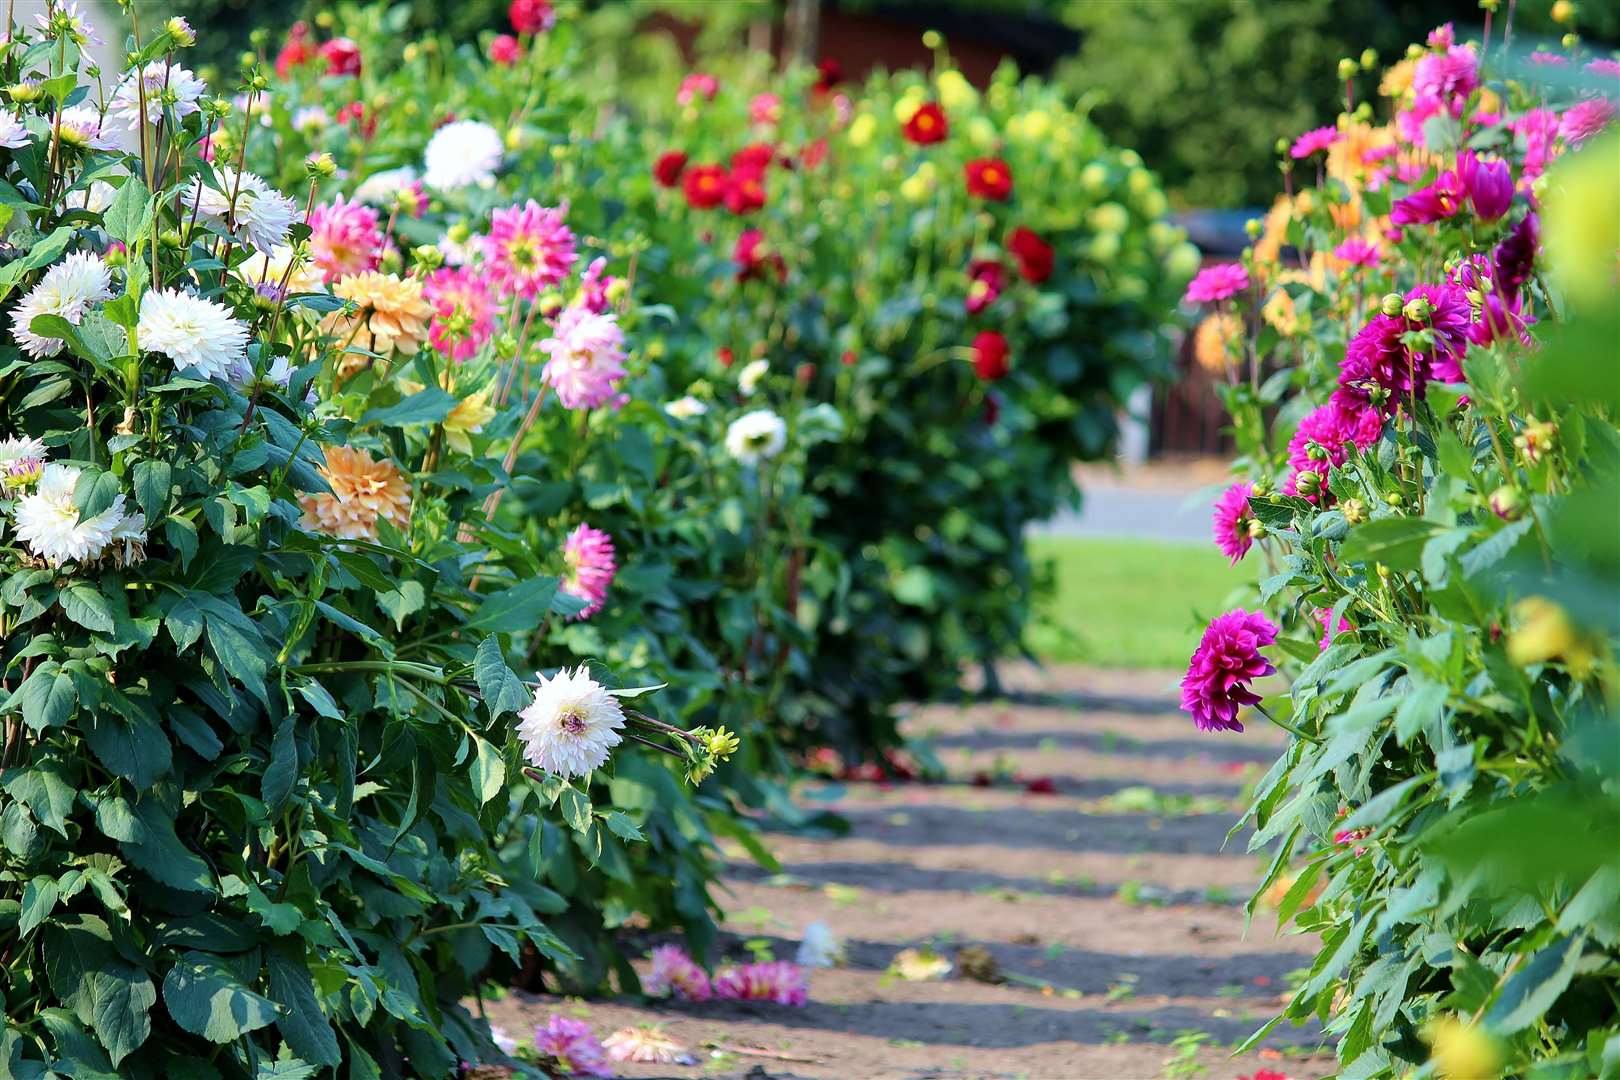 Bright colours lining a path are great in a garden designed for entertaining.